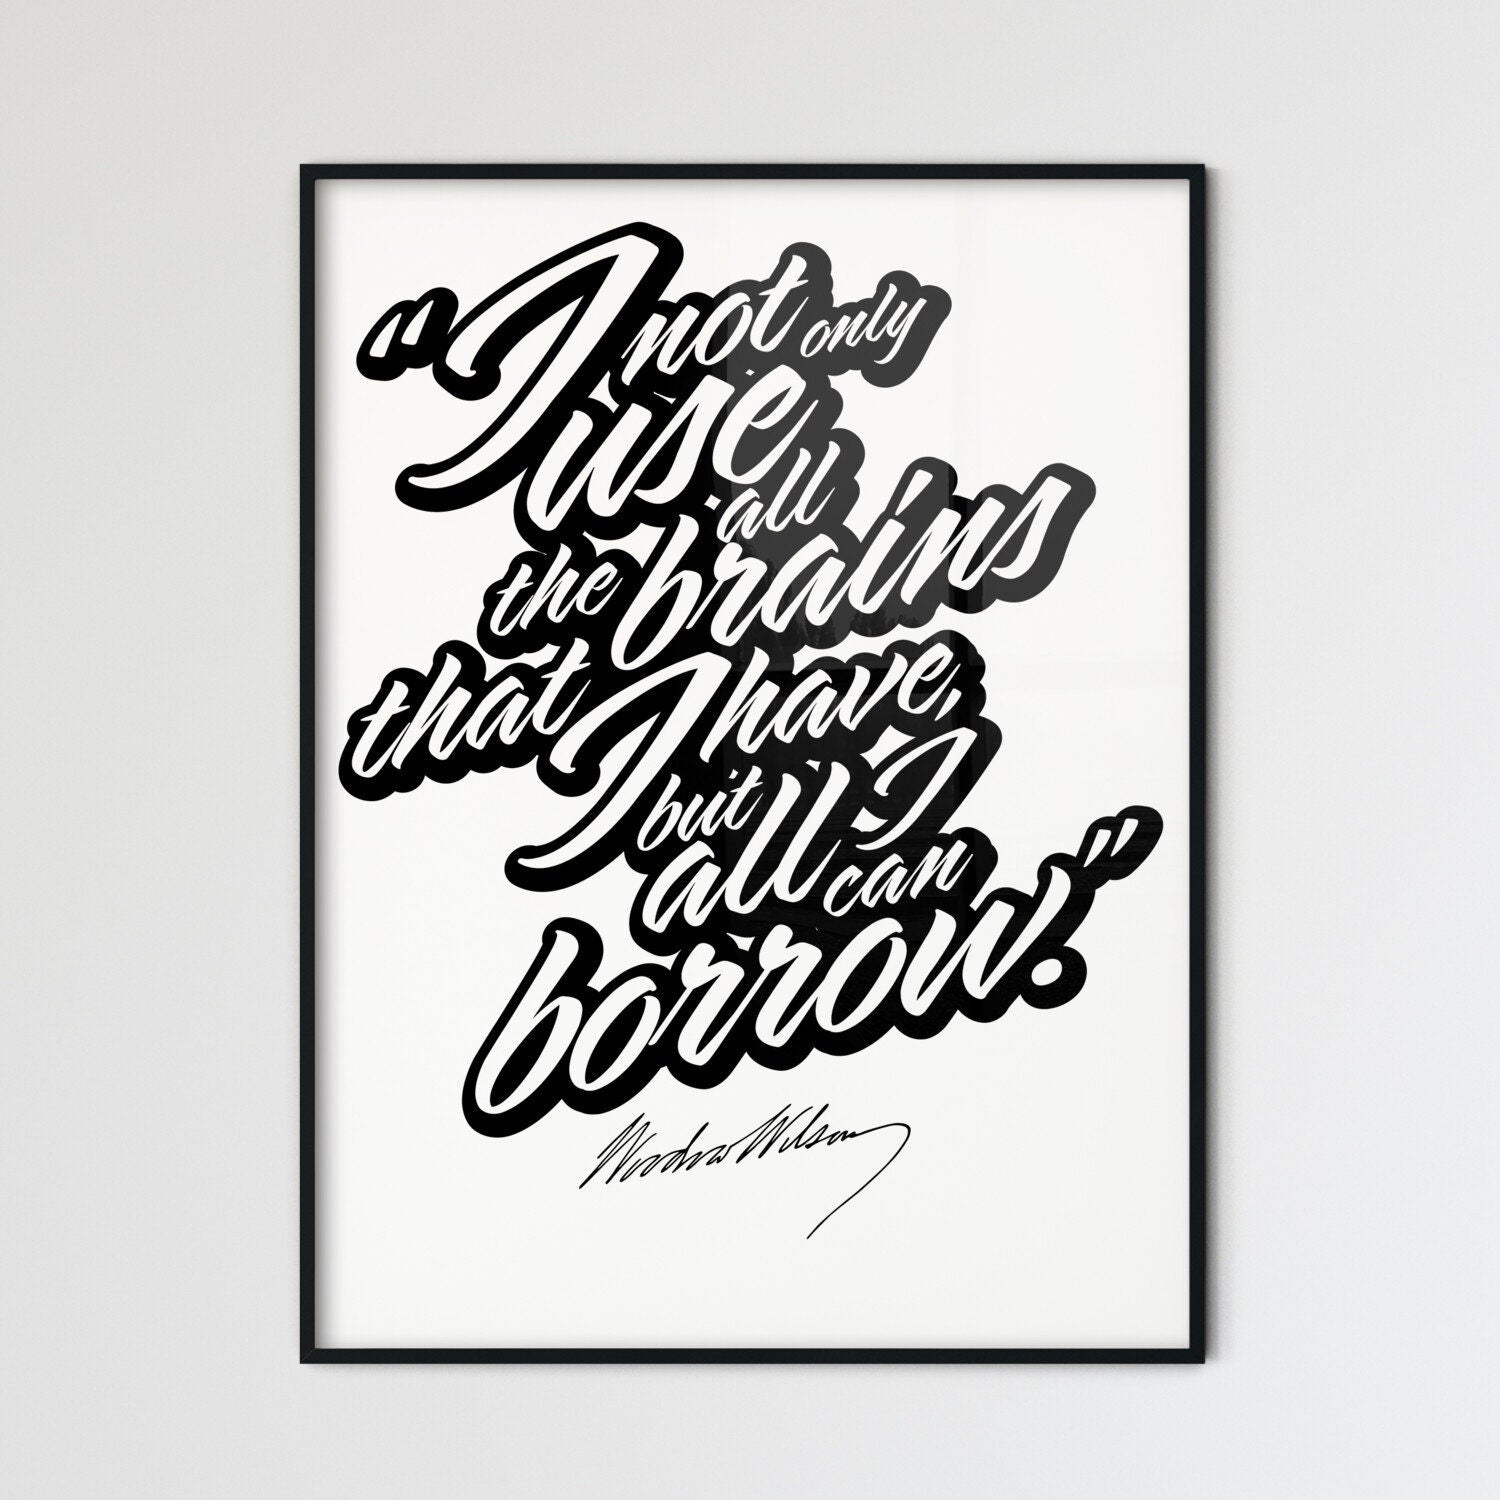 I Not Only Use All The Brains That I Have, But All I Can Borrow Lettering Poster. Perfect print for patriots.